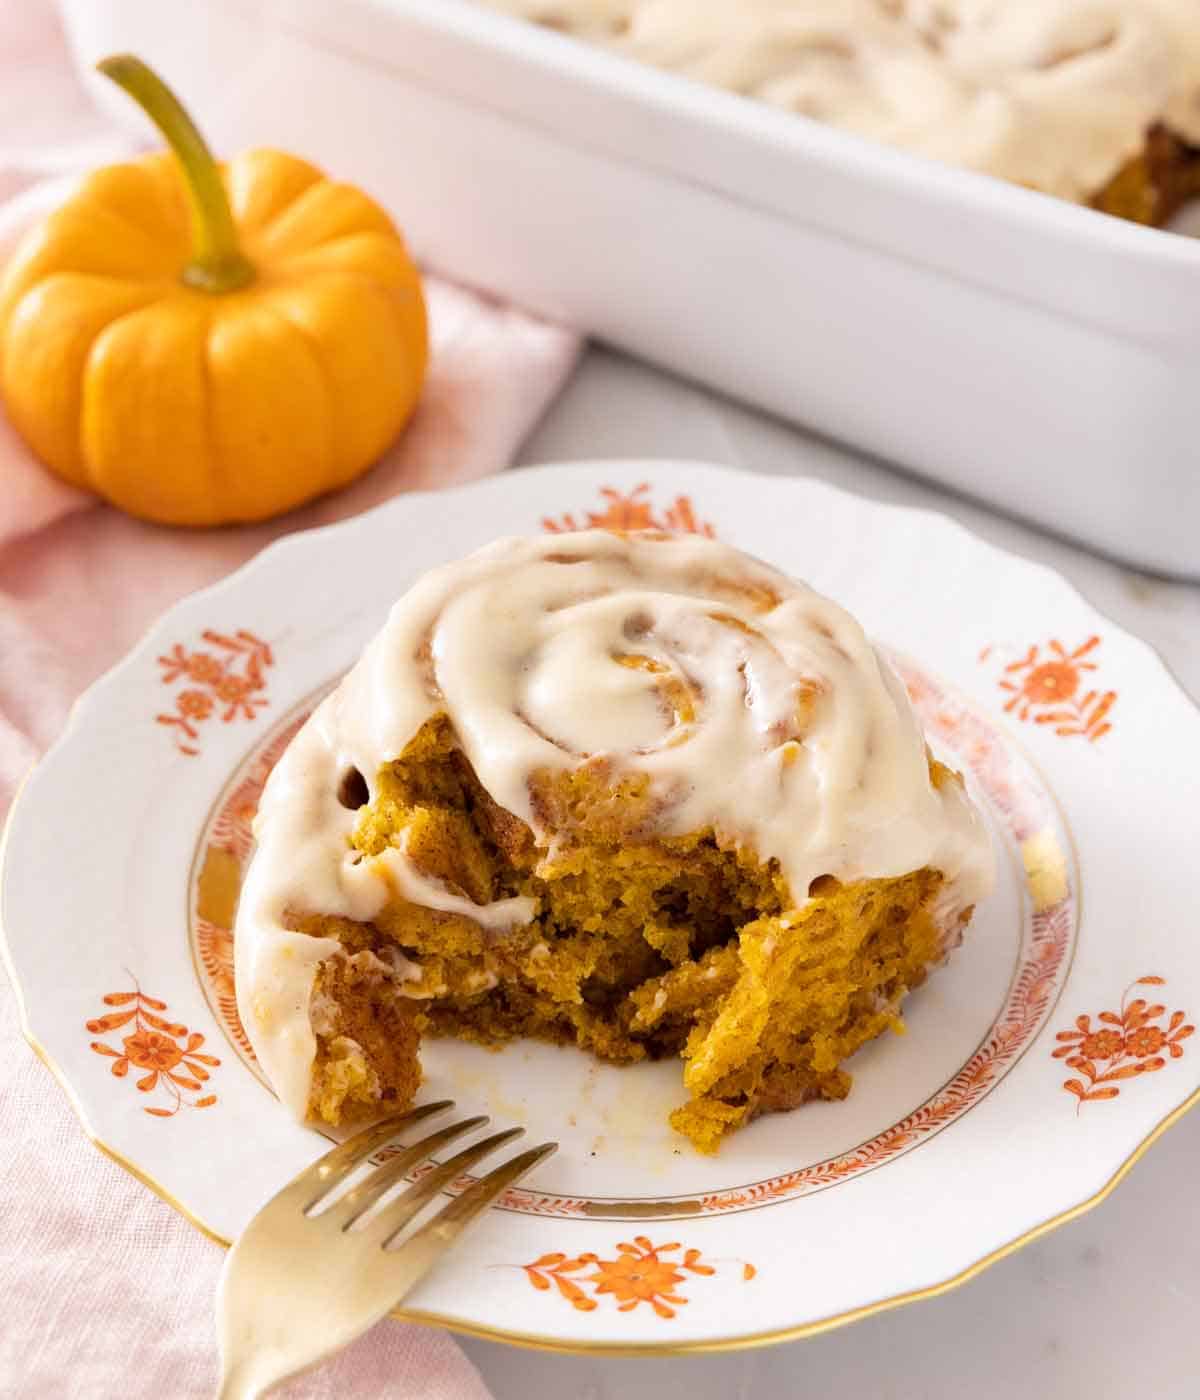 A plate with a single pumpkin cinnamon roll with a bite taken out and a fork in front of it.